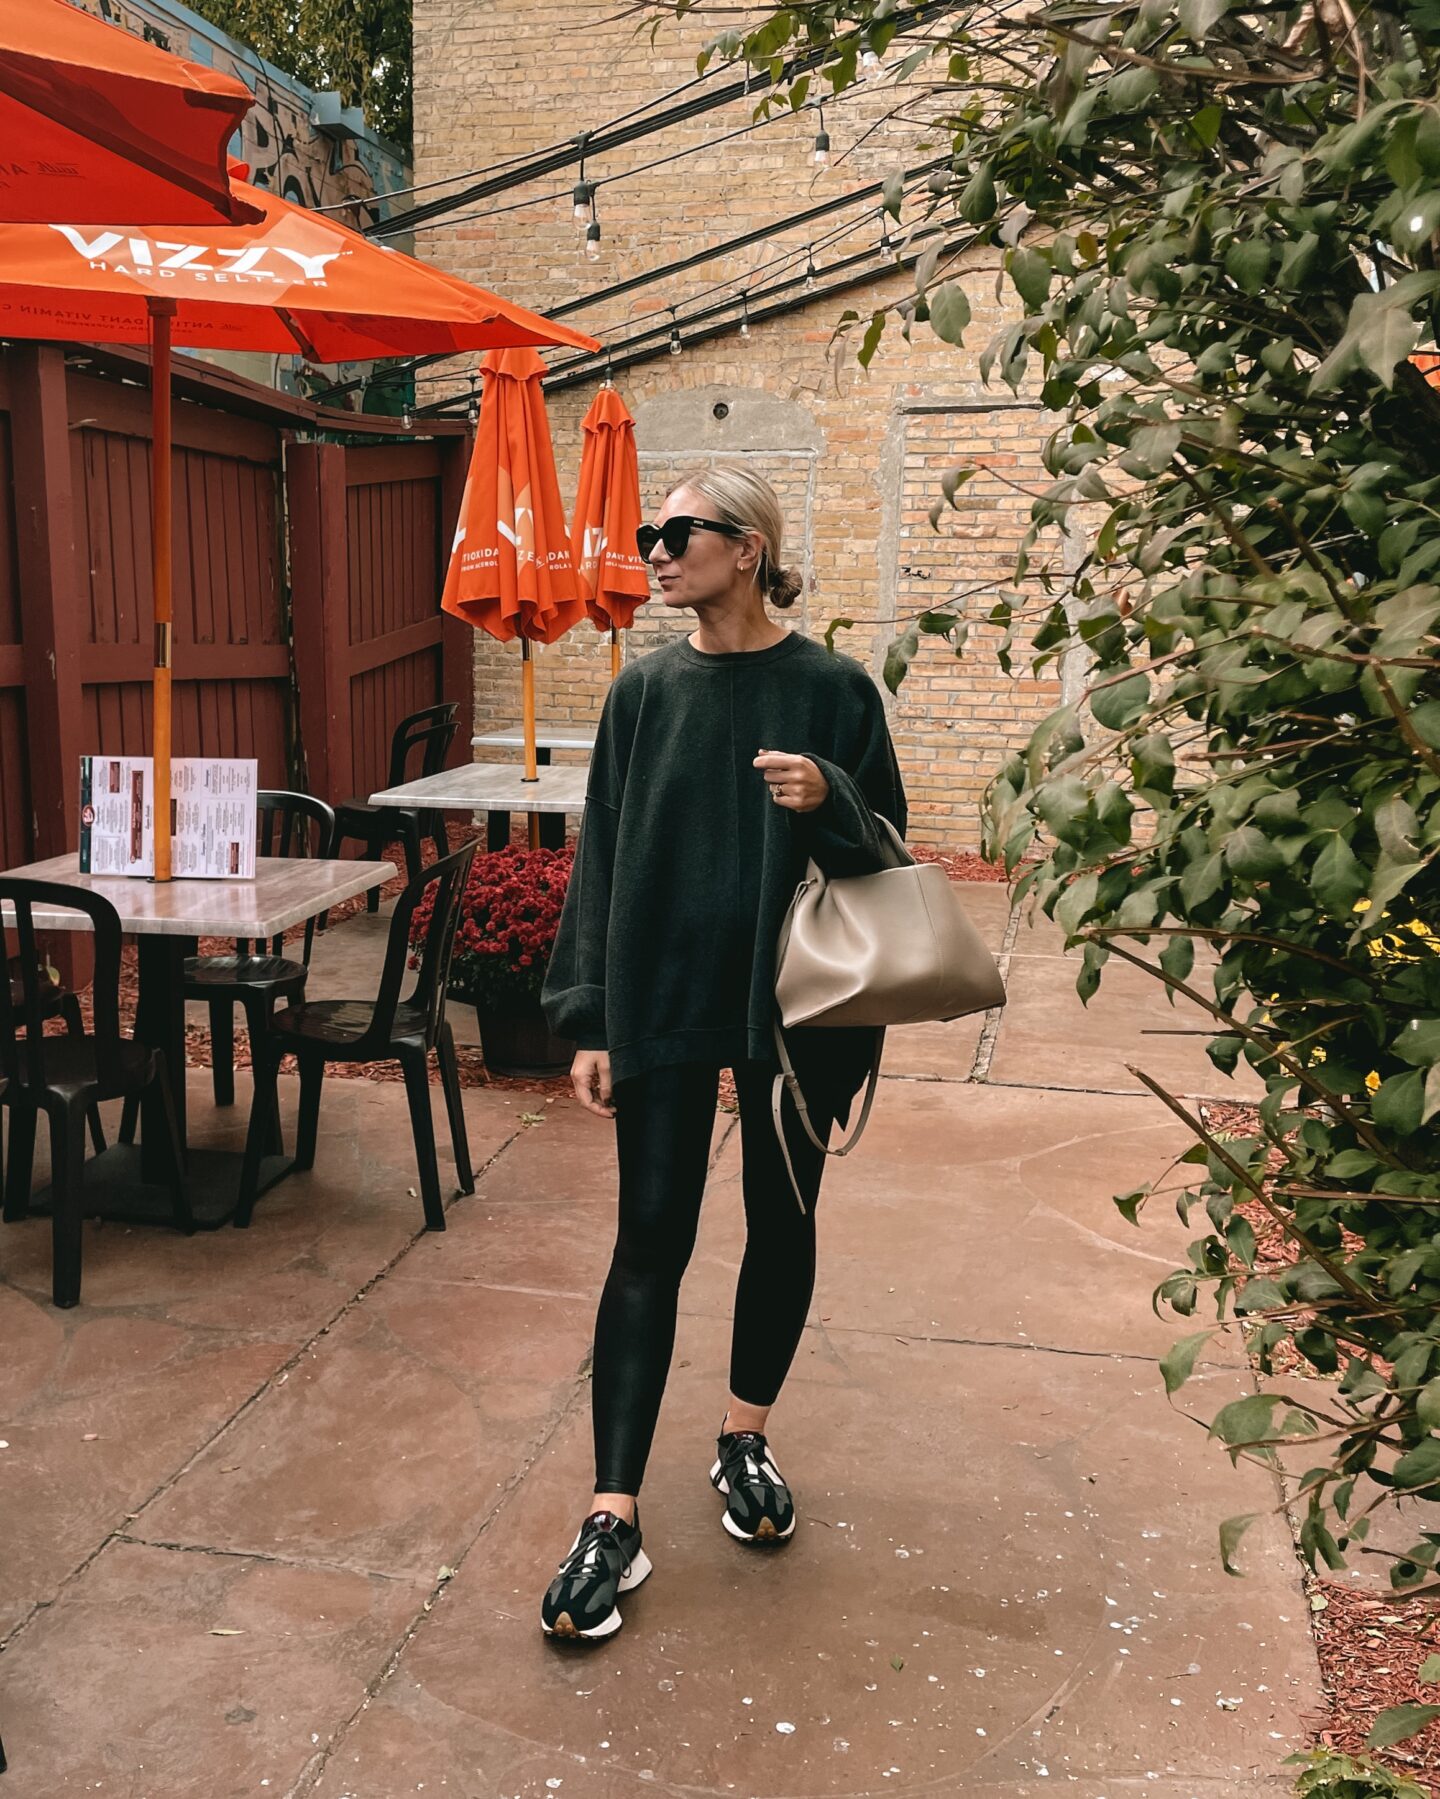 Karin Emily wears a charcoal colored sweatshirt tunic, black leggings, and a pair of black new balance sneakers